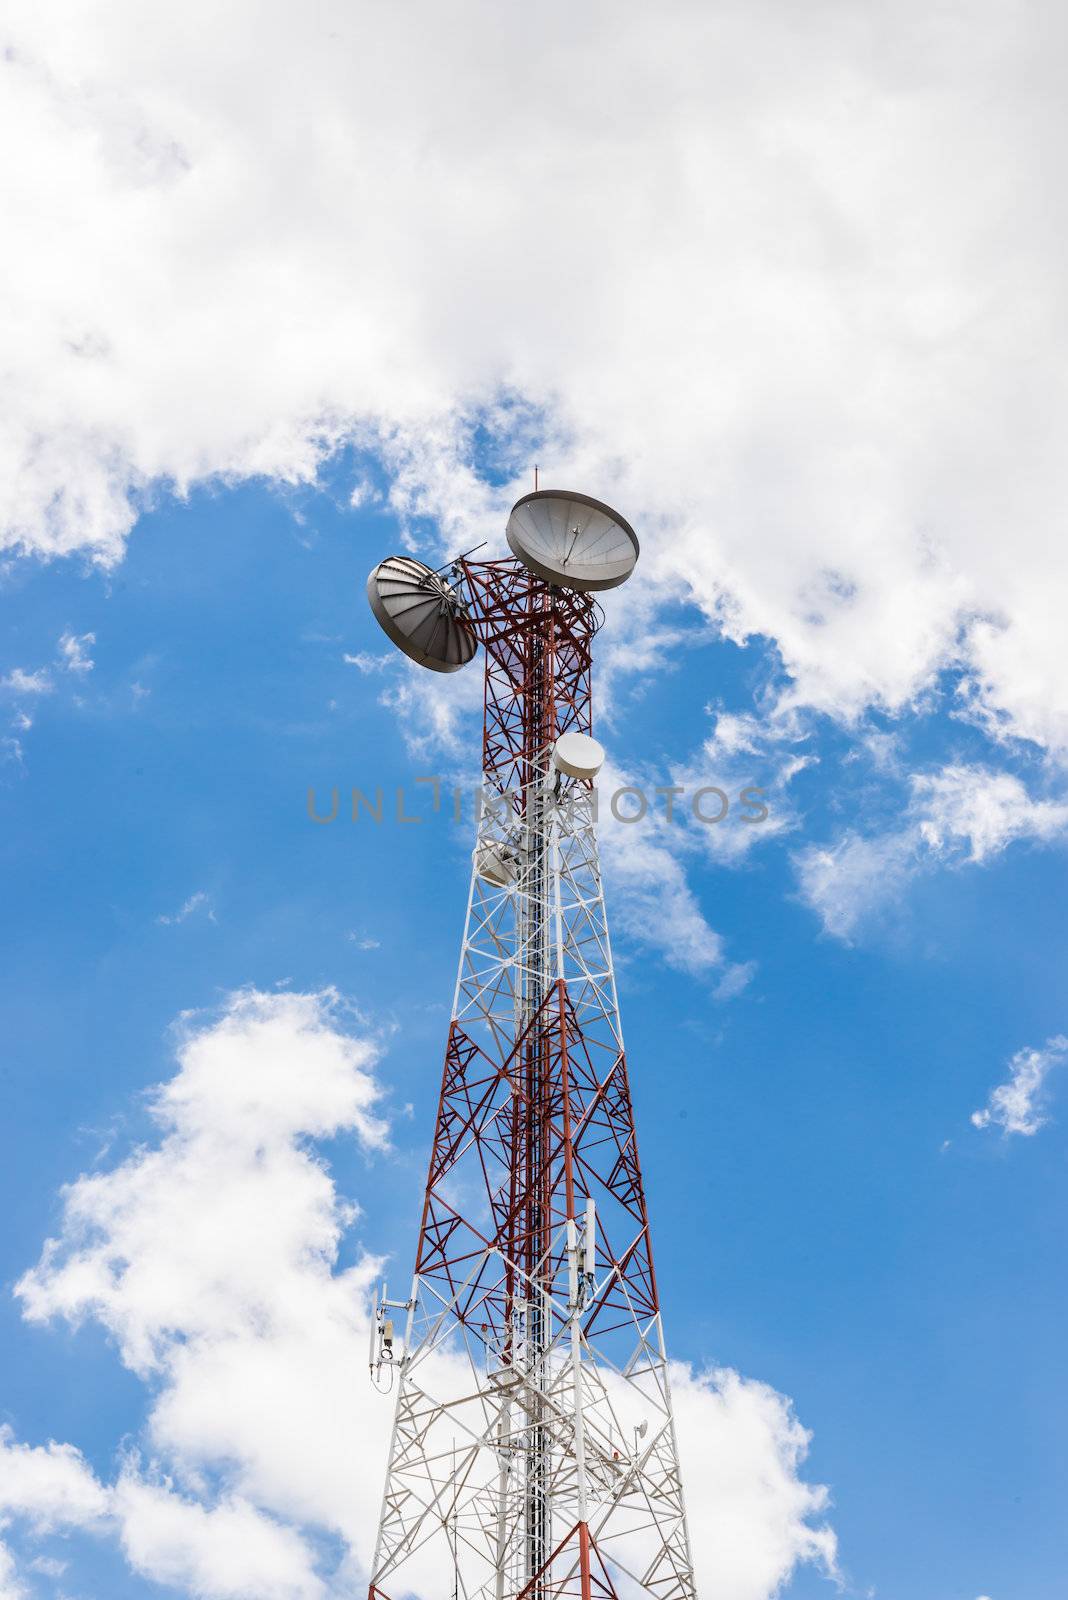 Red and white tower of communications with a lot of different antennas under clear sky.